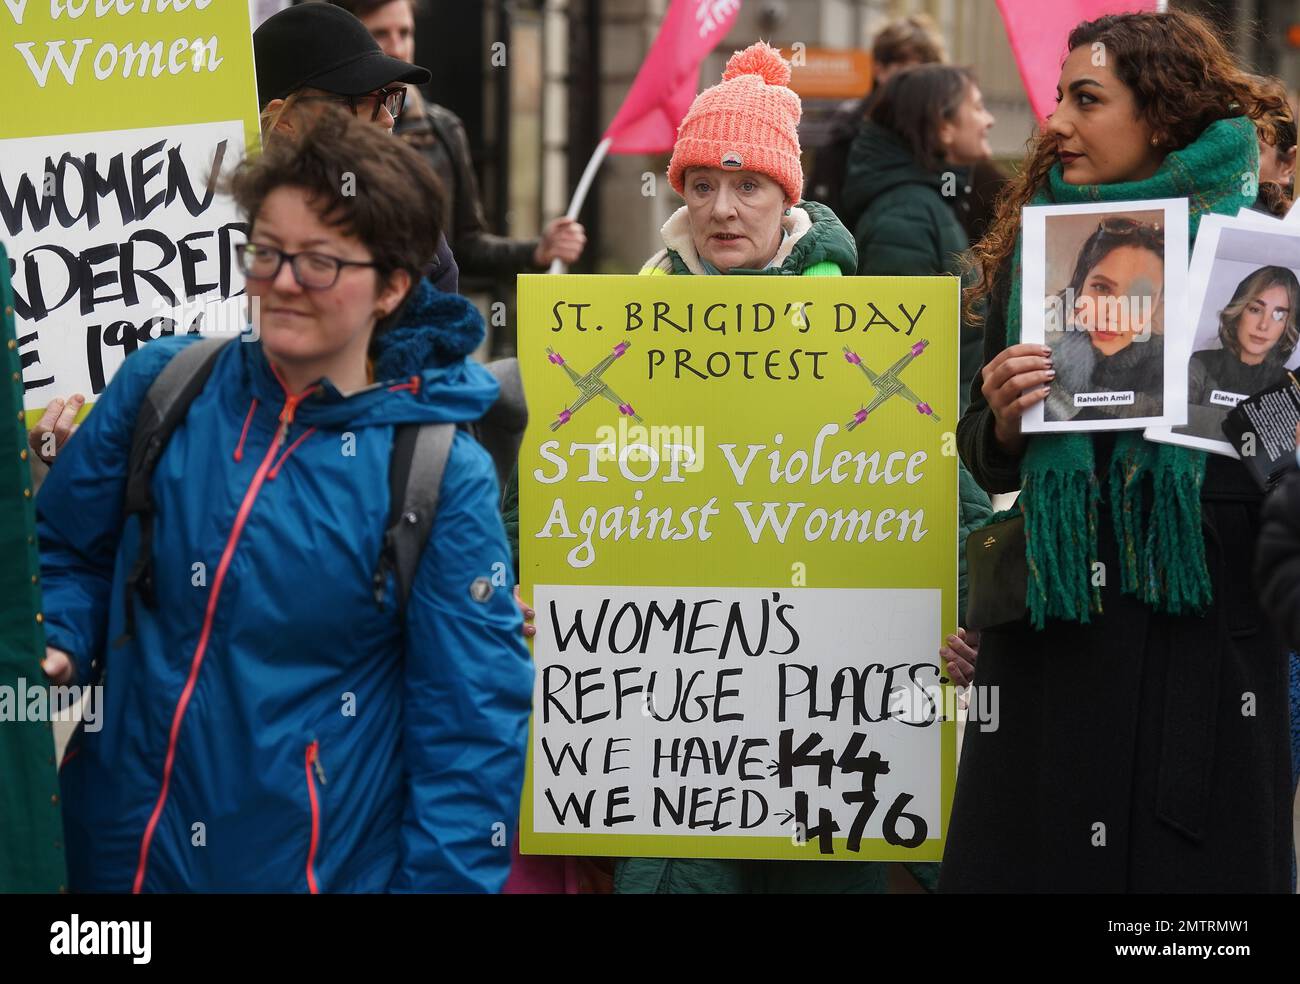 People attend a St Brigid's Day rally outside Leinster House, Dublin, calling on the Government to take action in addressing violence against women in Ireland. The rally was held to coincide with St Brigid’s Day, with speakers asking that women be protected in the spirit of the Celtic goddess and Christian saint Brigid, who is associated with healing. Picture date: Wednesday February 1, 2023. Stock Photo